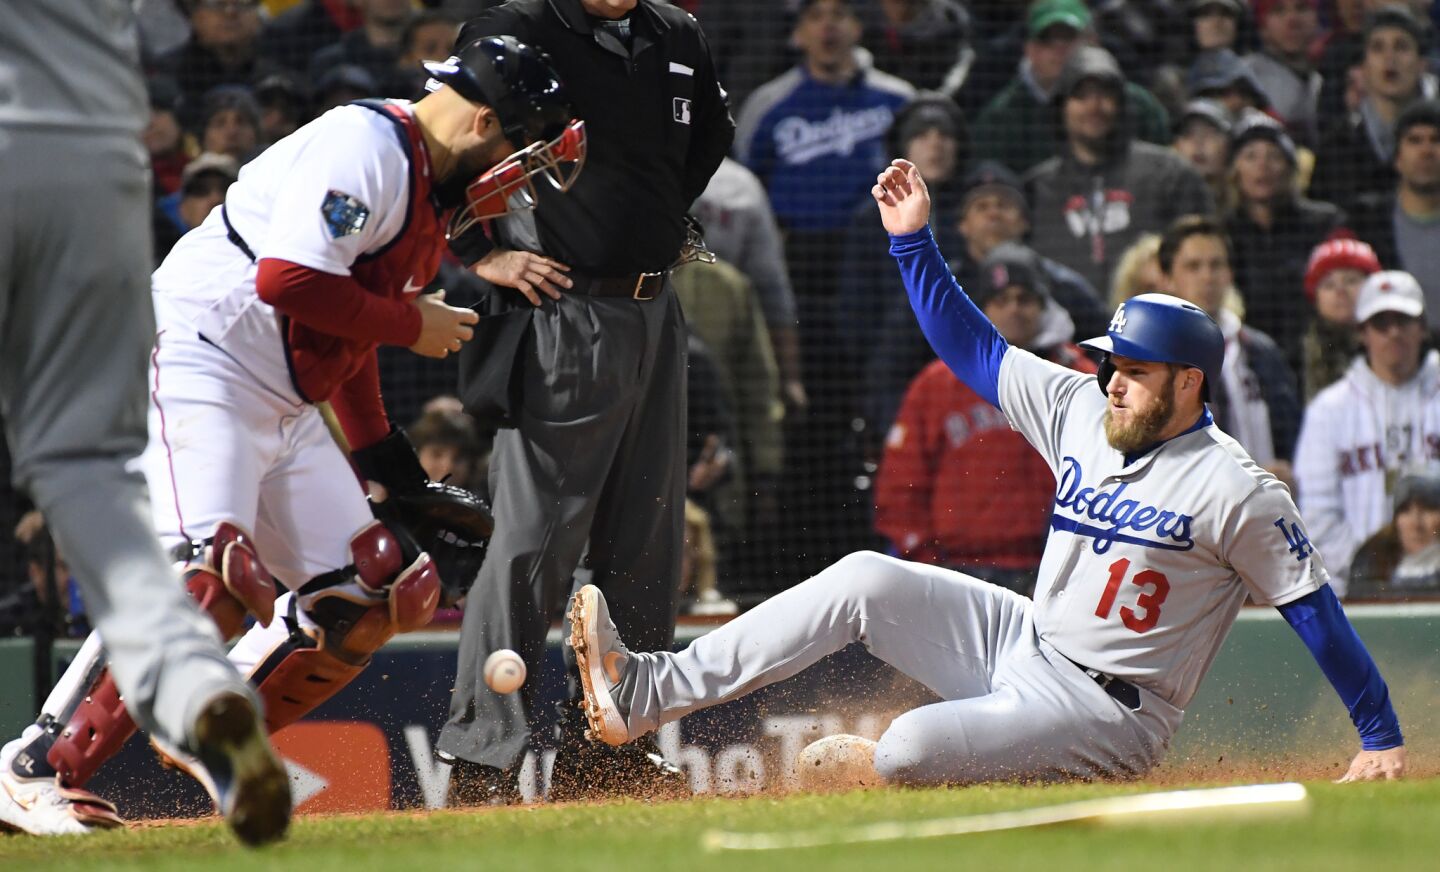 Dodgers Max Muncy scores on a sacrifice fly as Red Sox catcher Sandy Leon bobbles the ball in the 7th inning.